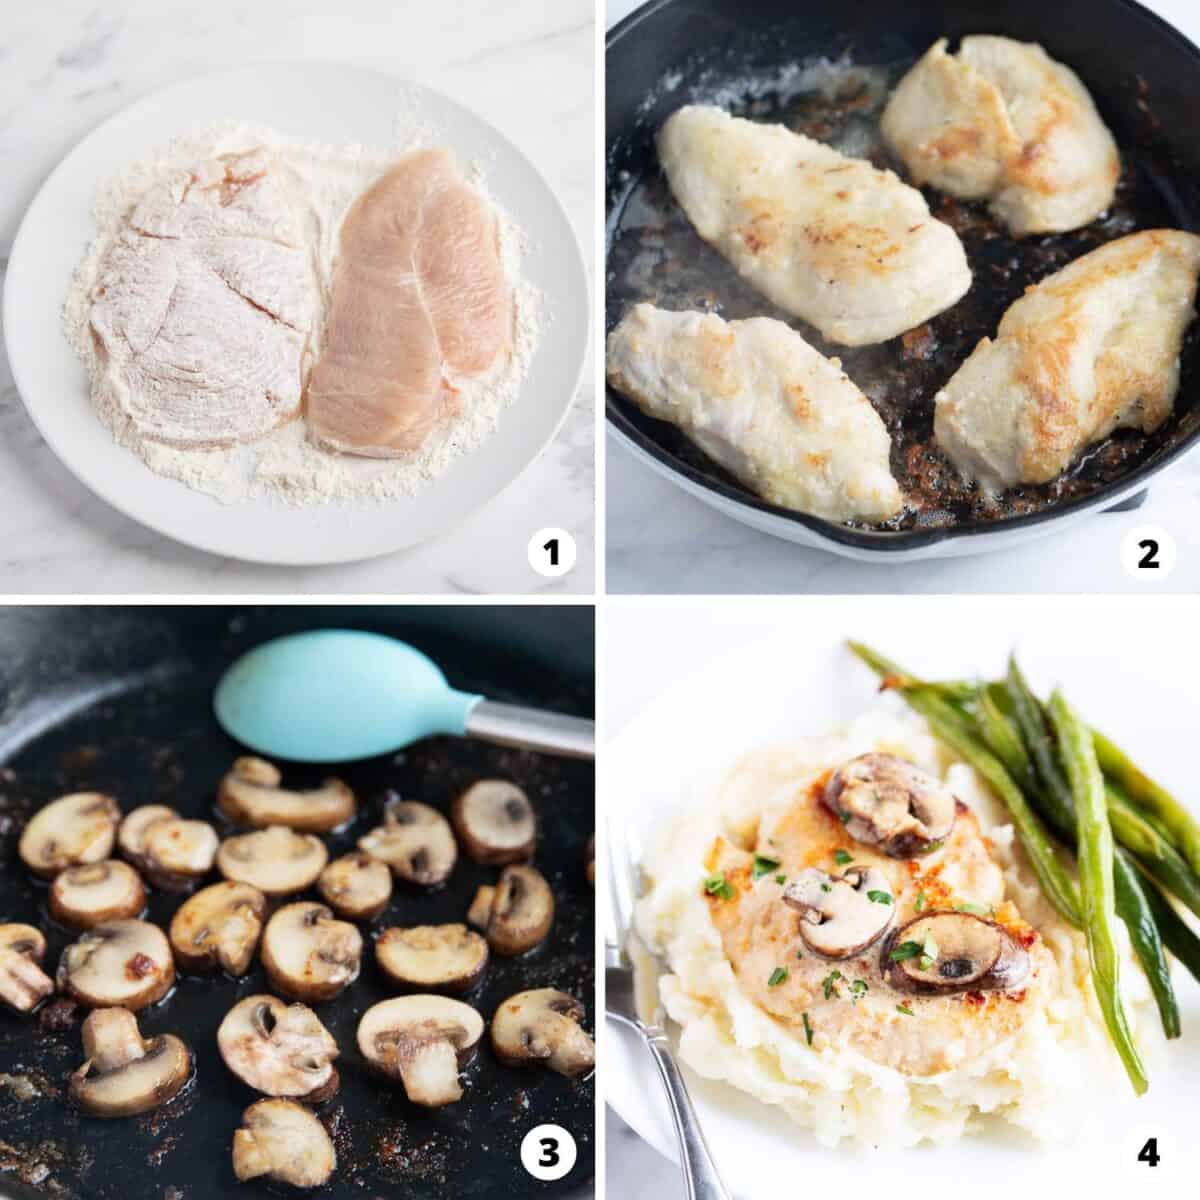 Showing how to make chicken marsala in a 4 step collage.